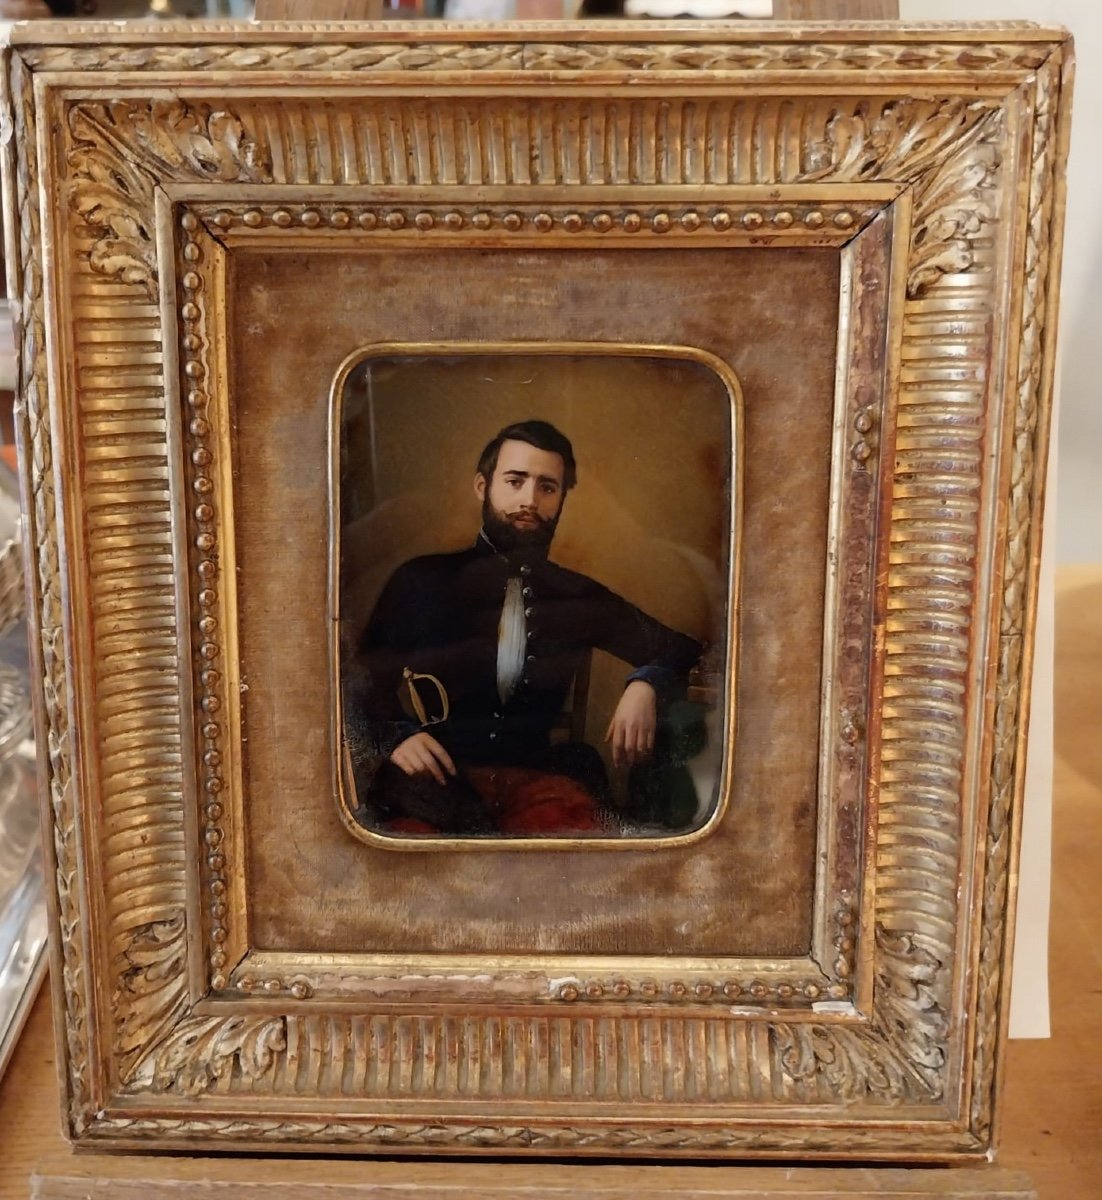 Fixed Under Glass, Portrait Of A 19th Century Man.-photo-4